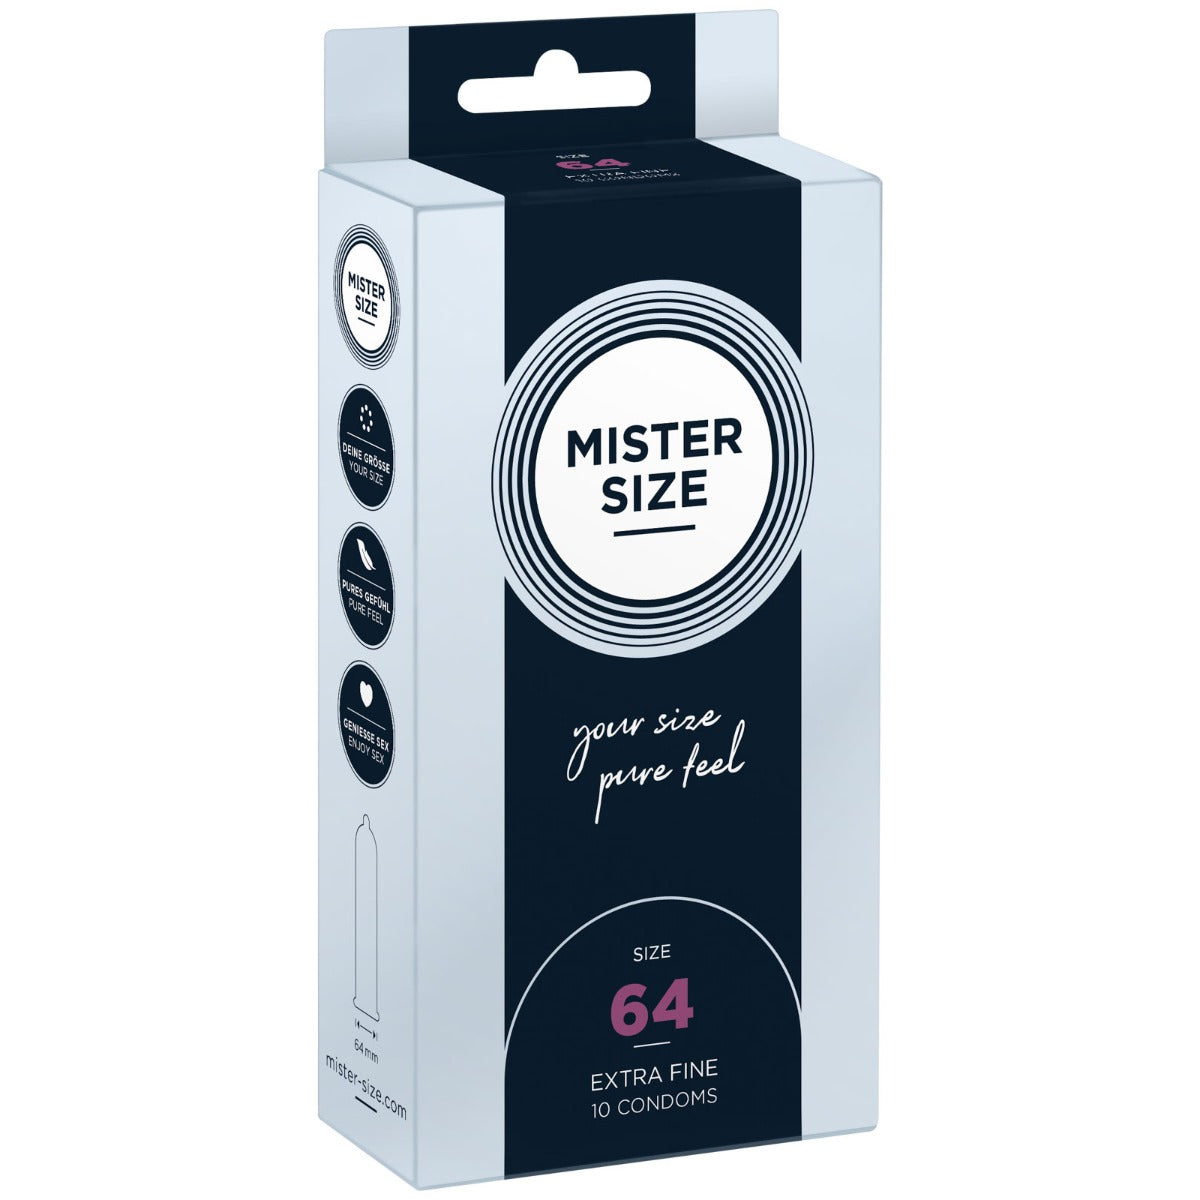 MISTER SIZE | Pure feel Condoms - Size 64 mm (10 pack)